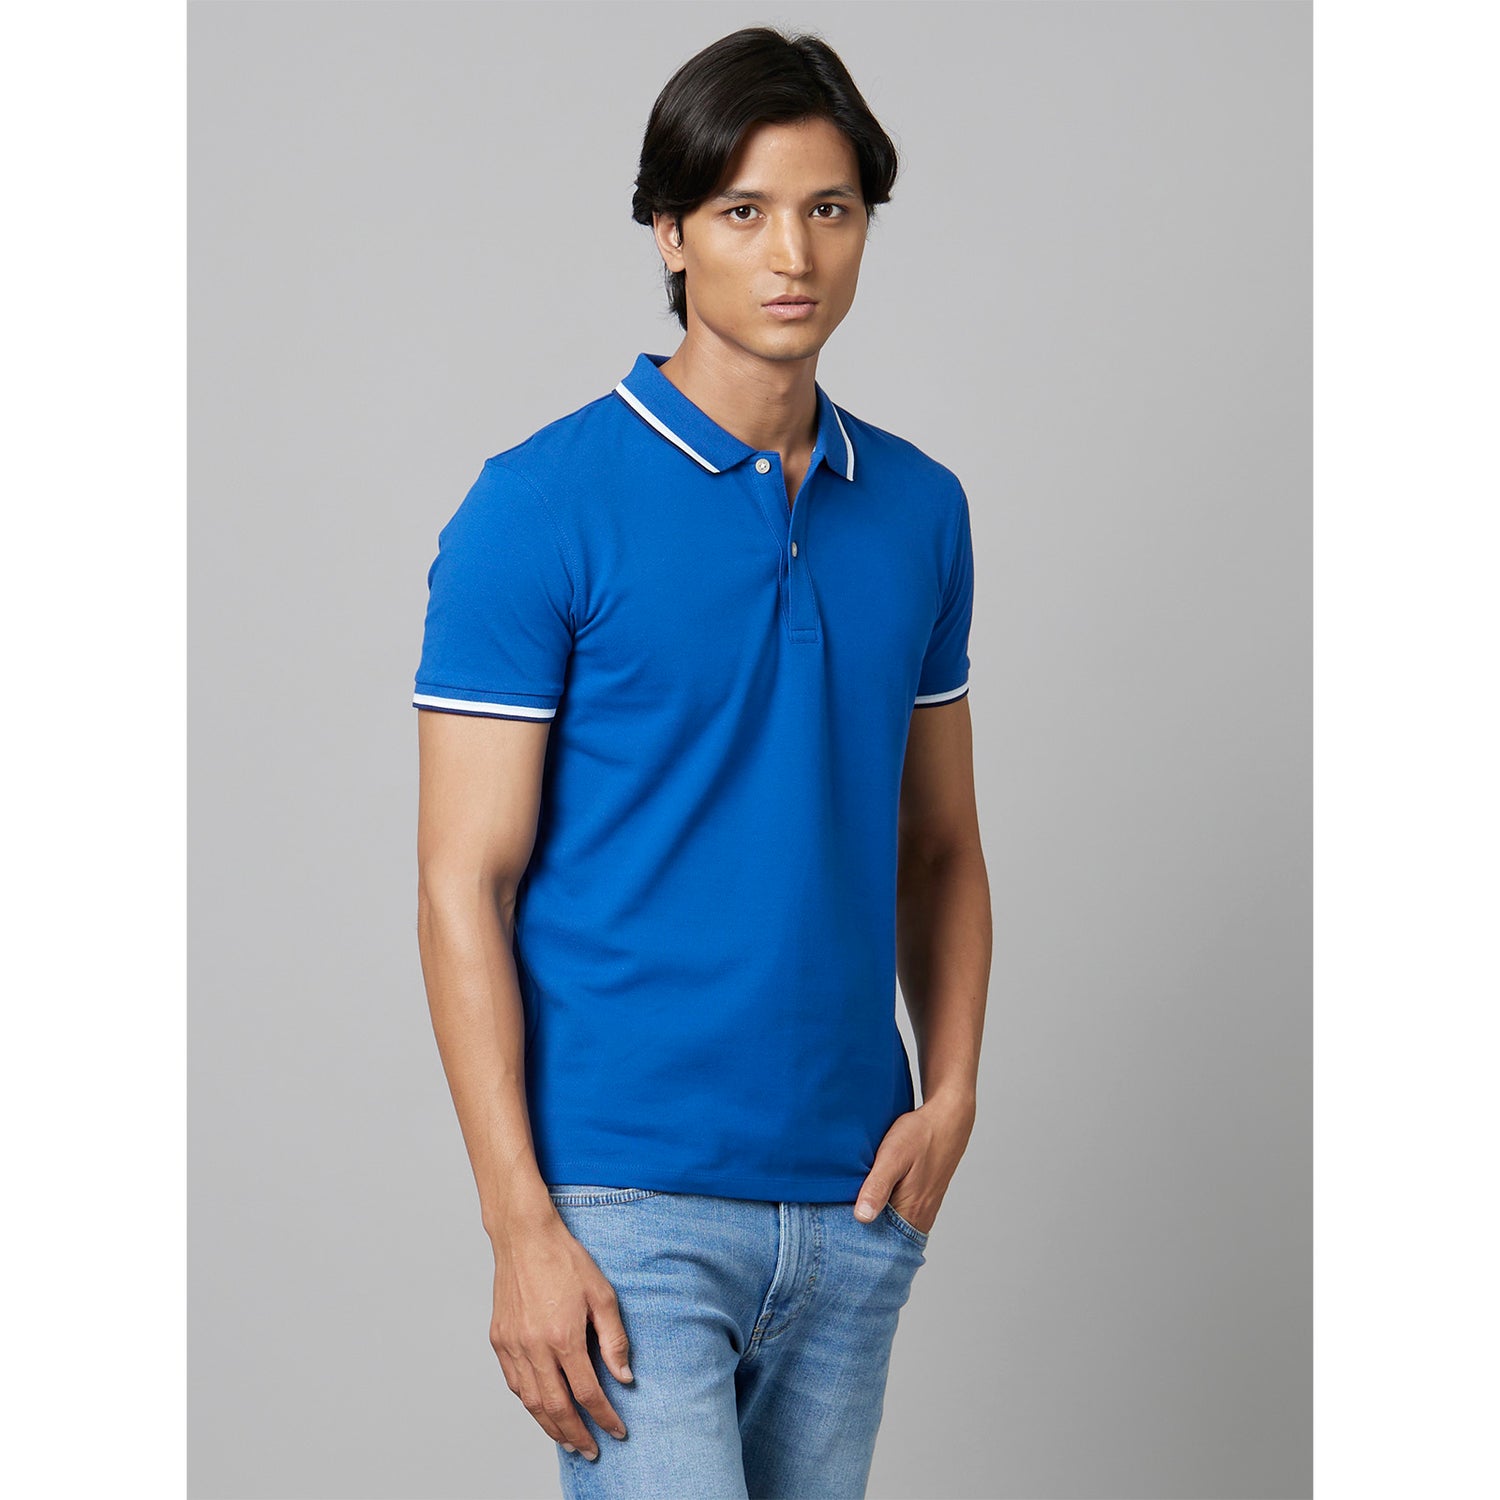 Blue Solid Short Sleeves Polo T-Shirt